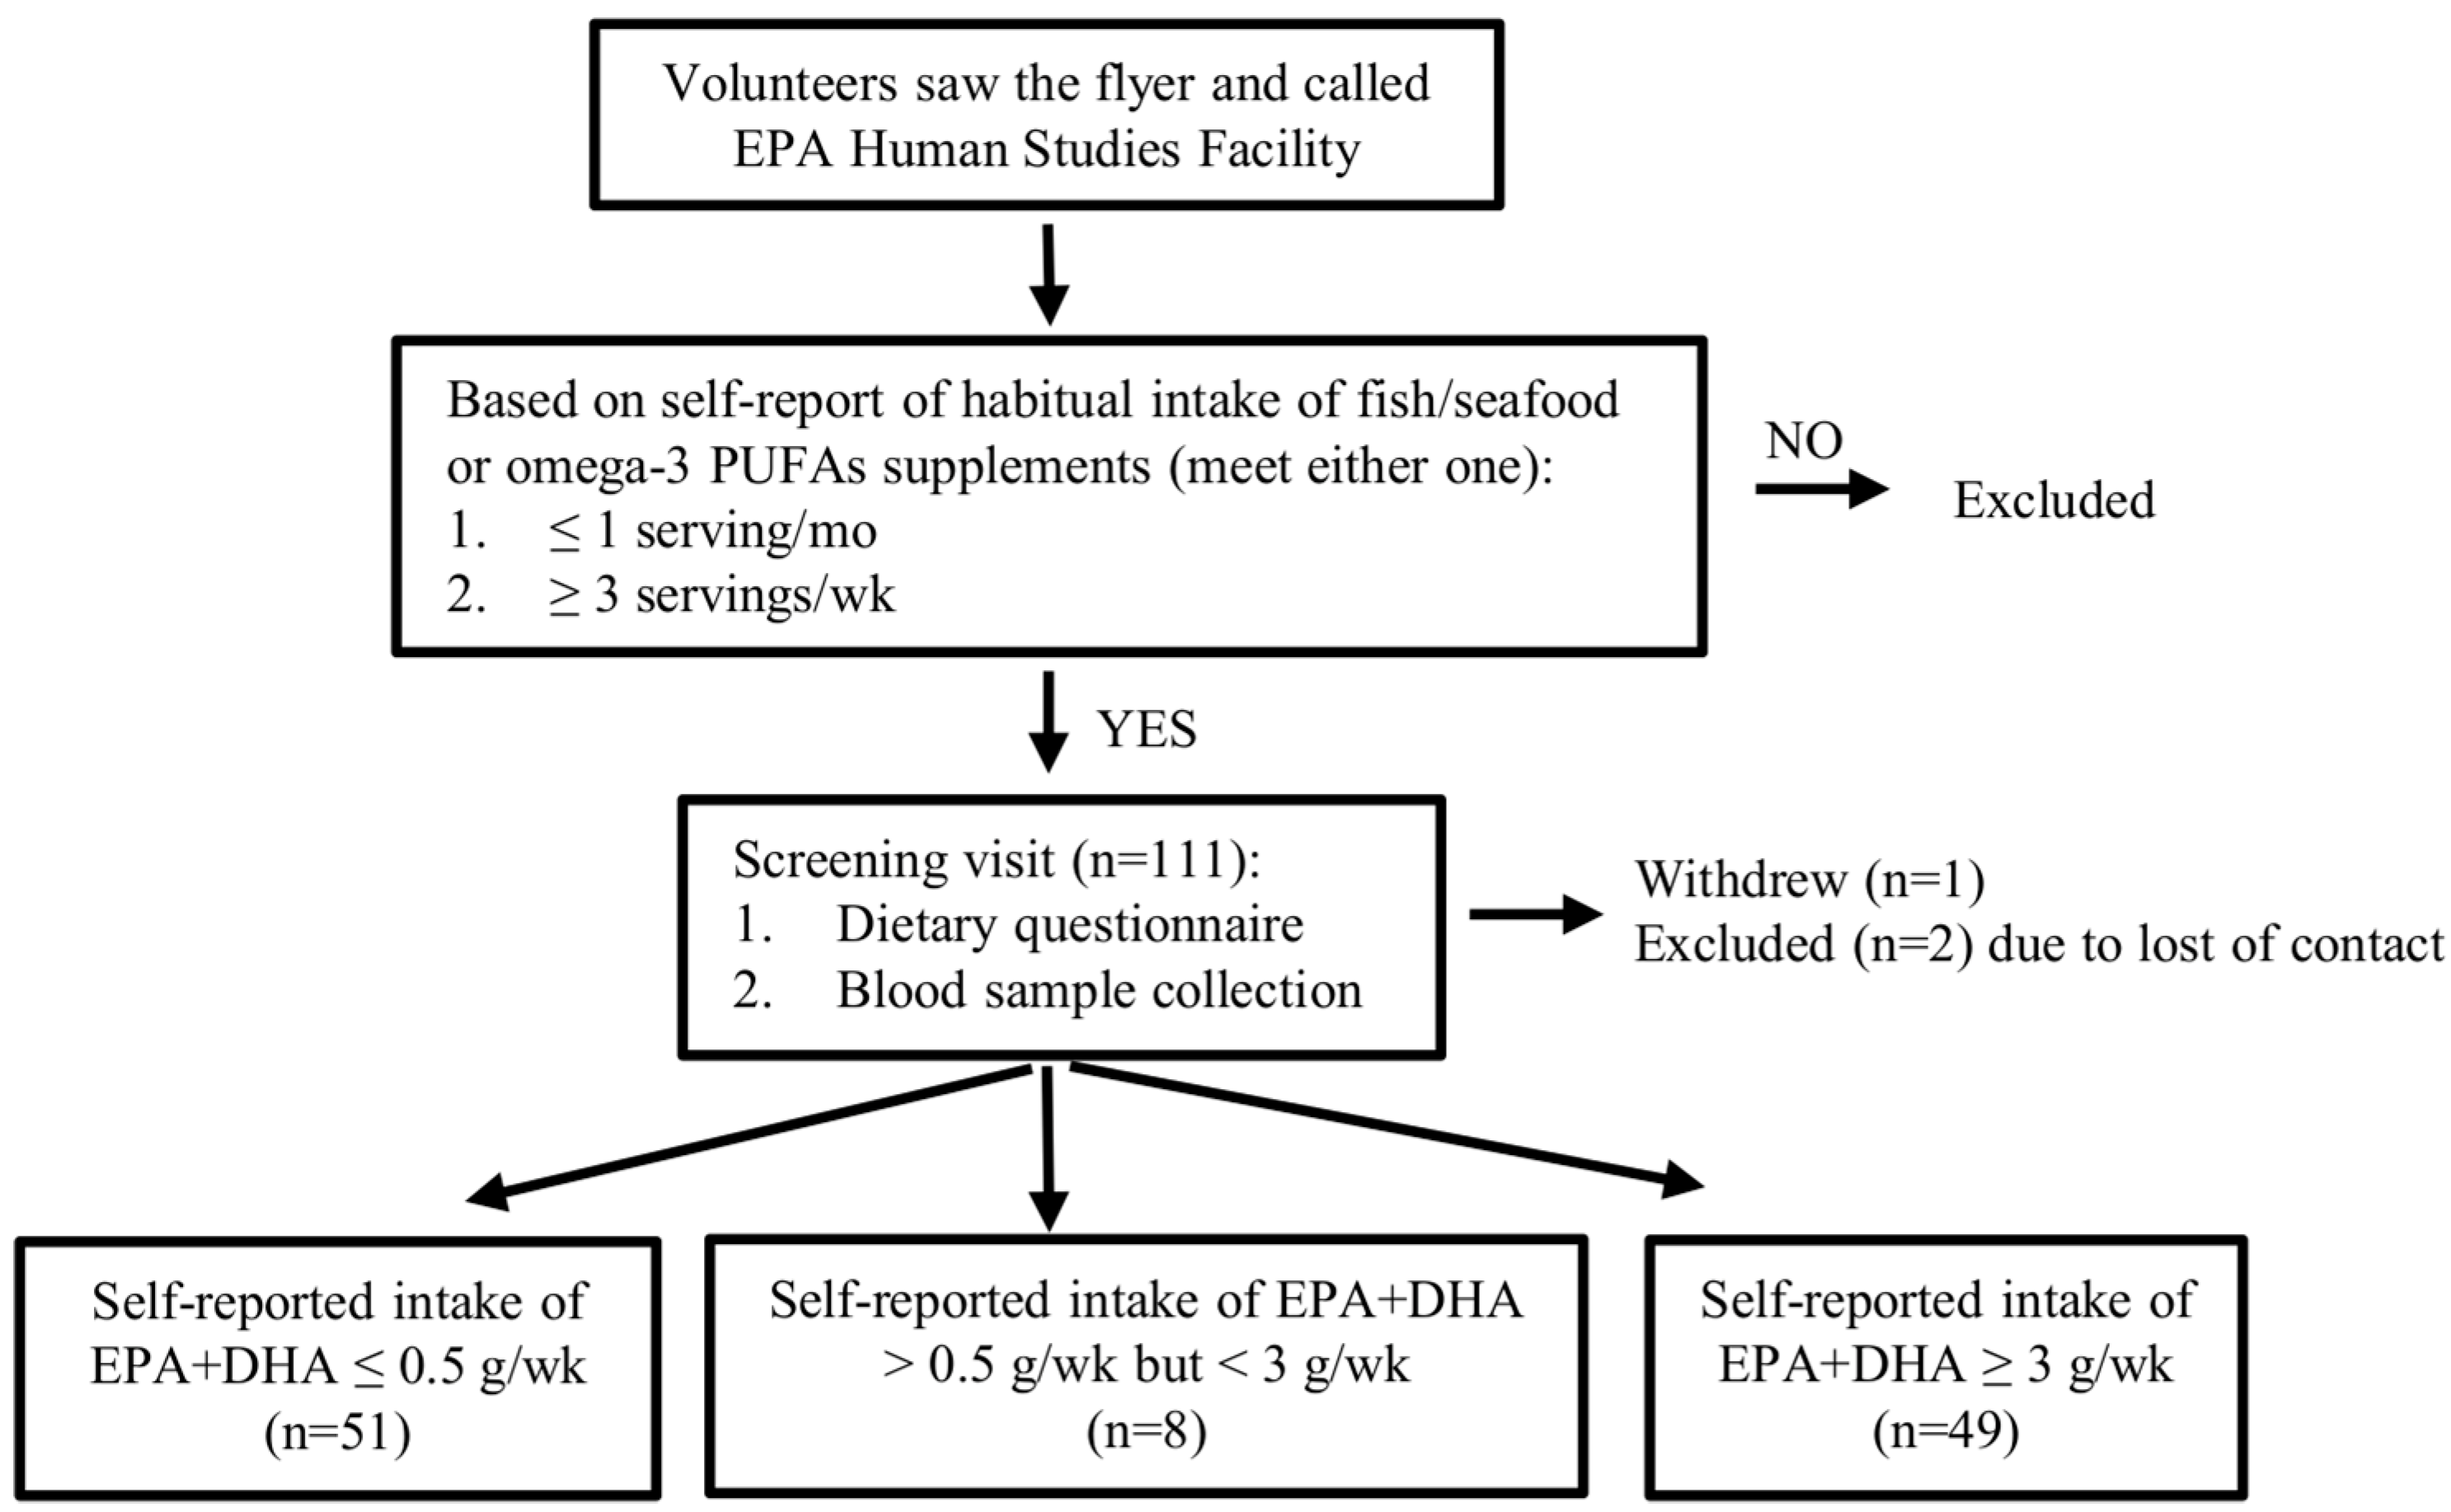 Appal Niet verwacht tij Nutrients | Free Full-Text | Validation of a Dietary Questionnaire to  Screen Omega-3 Fatty Acids Levels in Healthy Adults | HTML